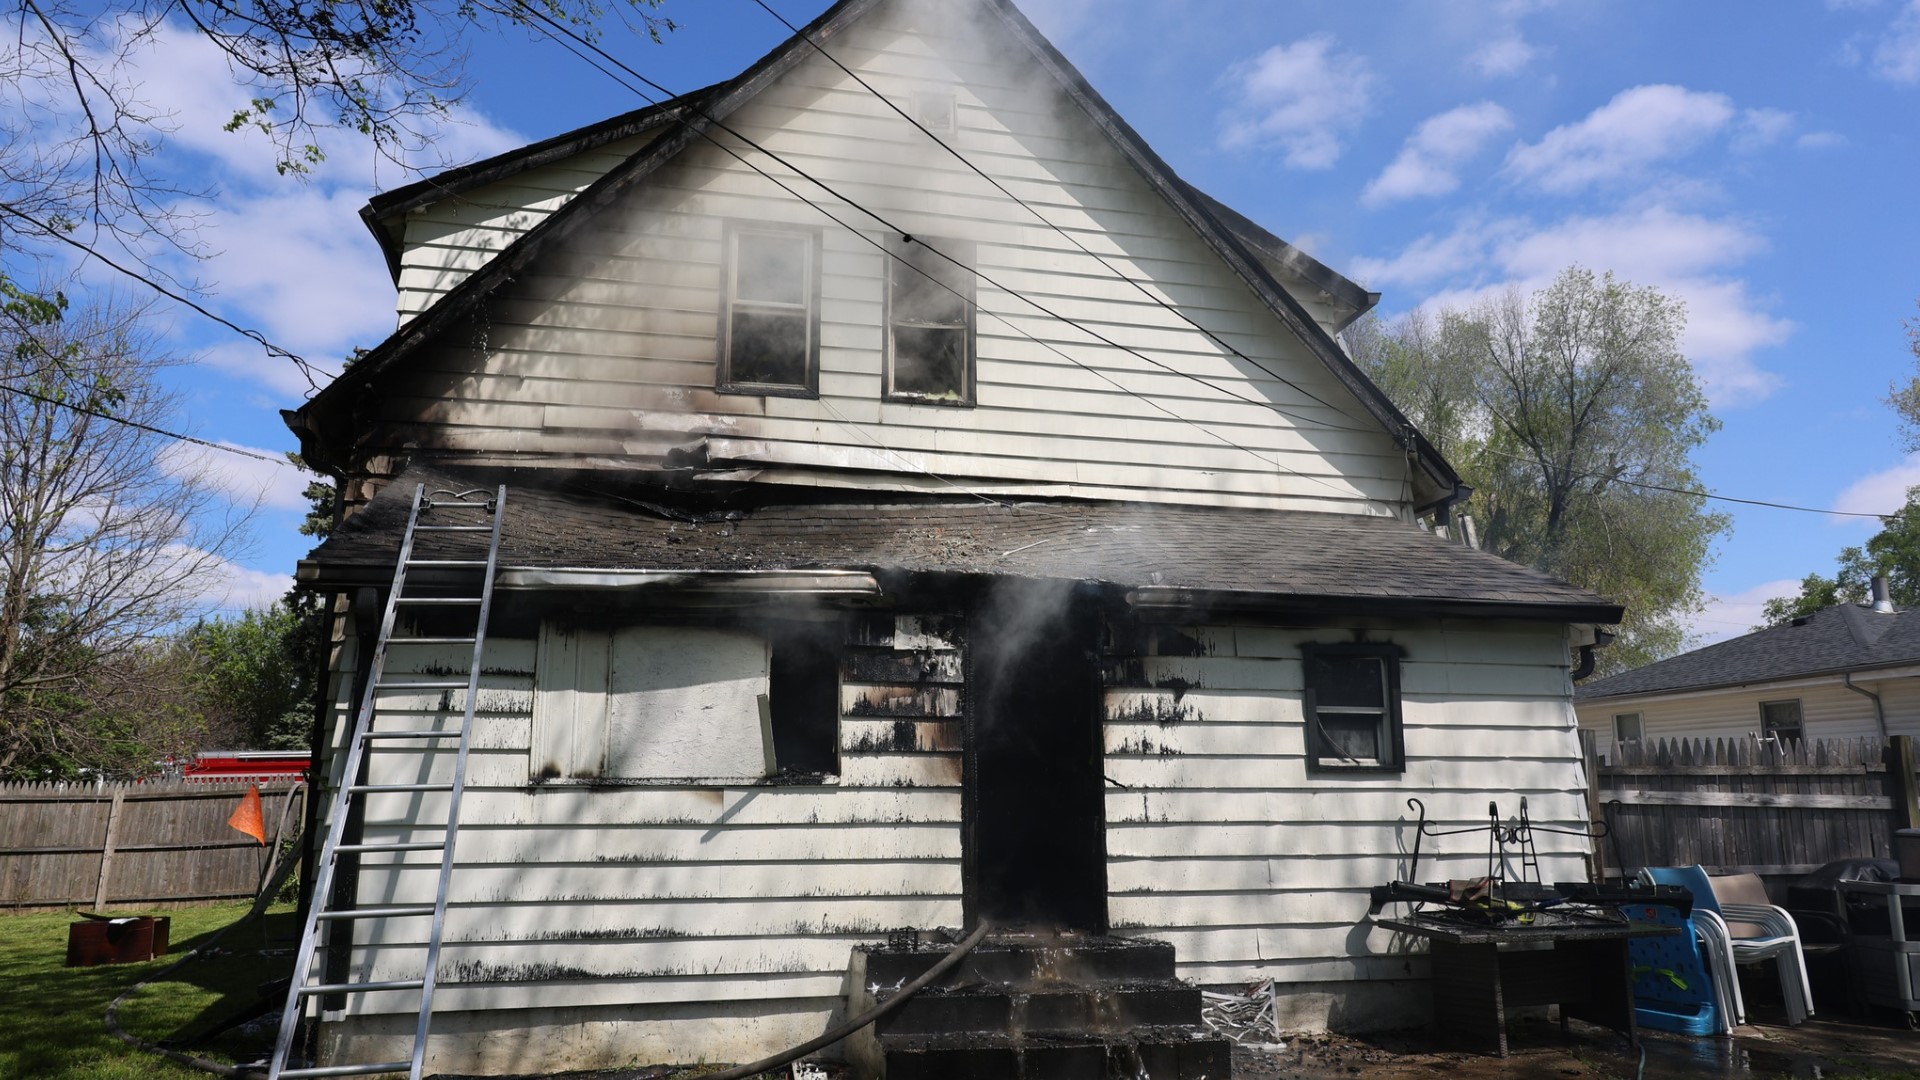 The fire was reported around noon Sunday in the 3600 block of West Michigan Street, near North Tibbs Avenue.